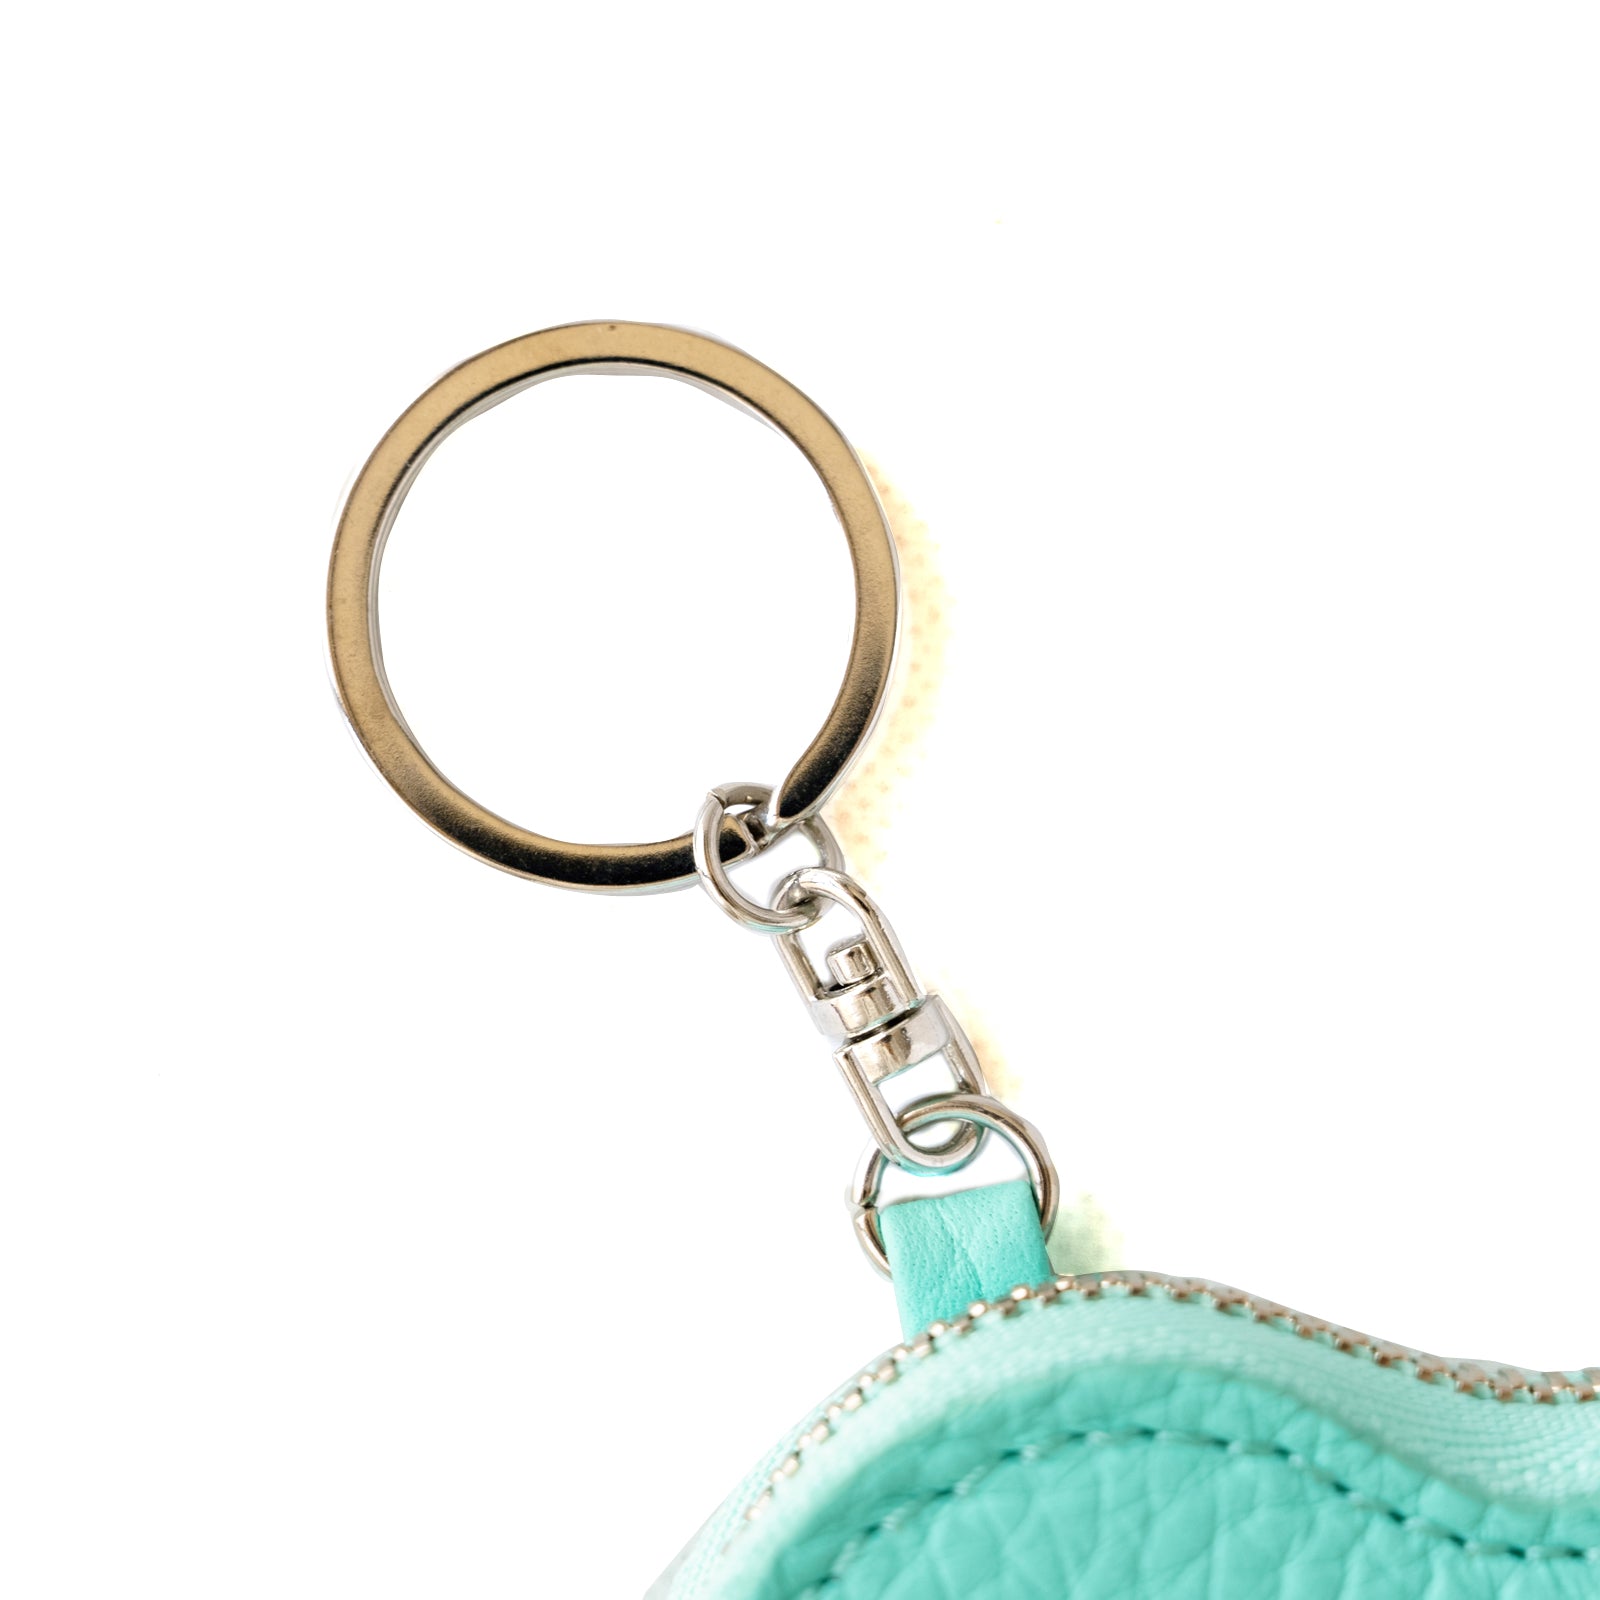 [Tiffany Blue / Back Color Order] Heart Coin Case Taurillon Clemence